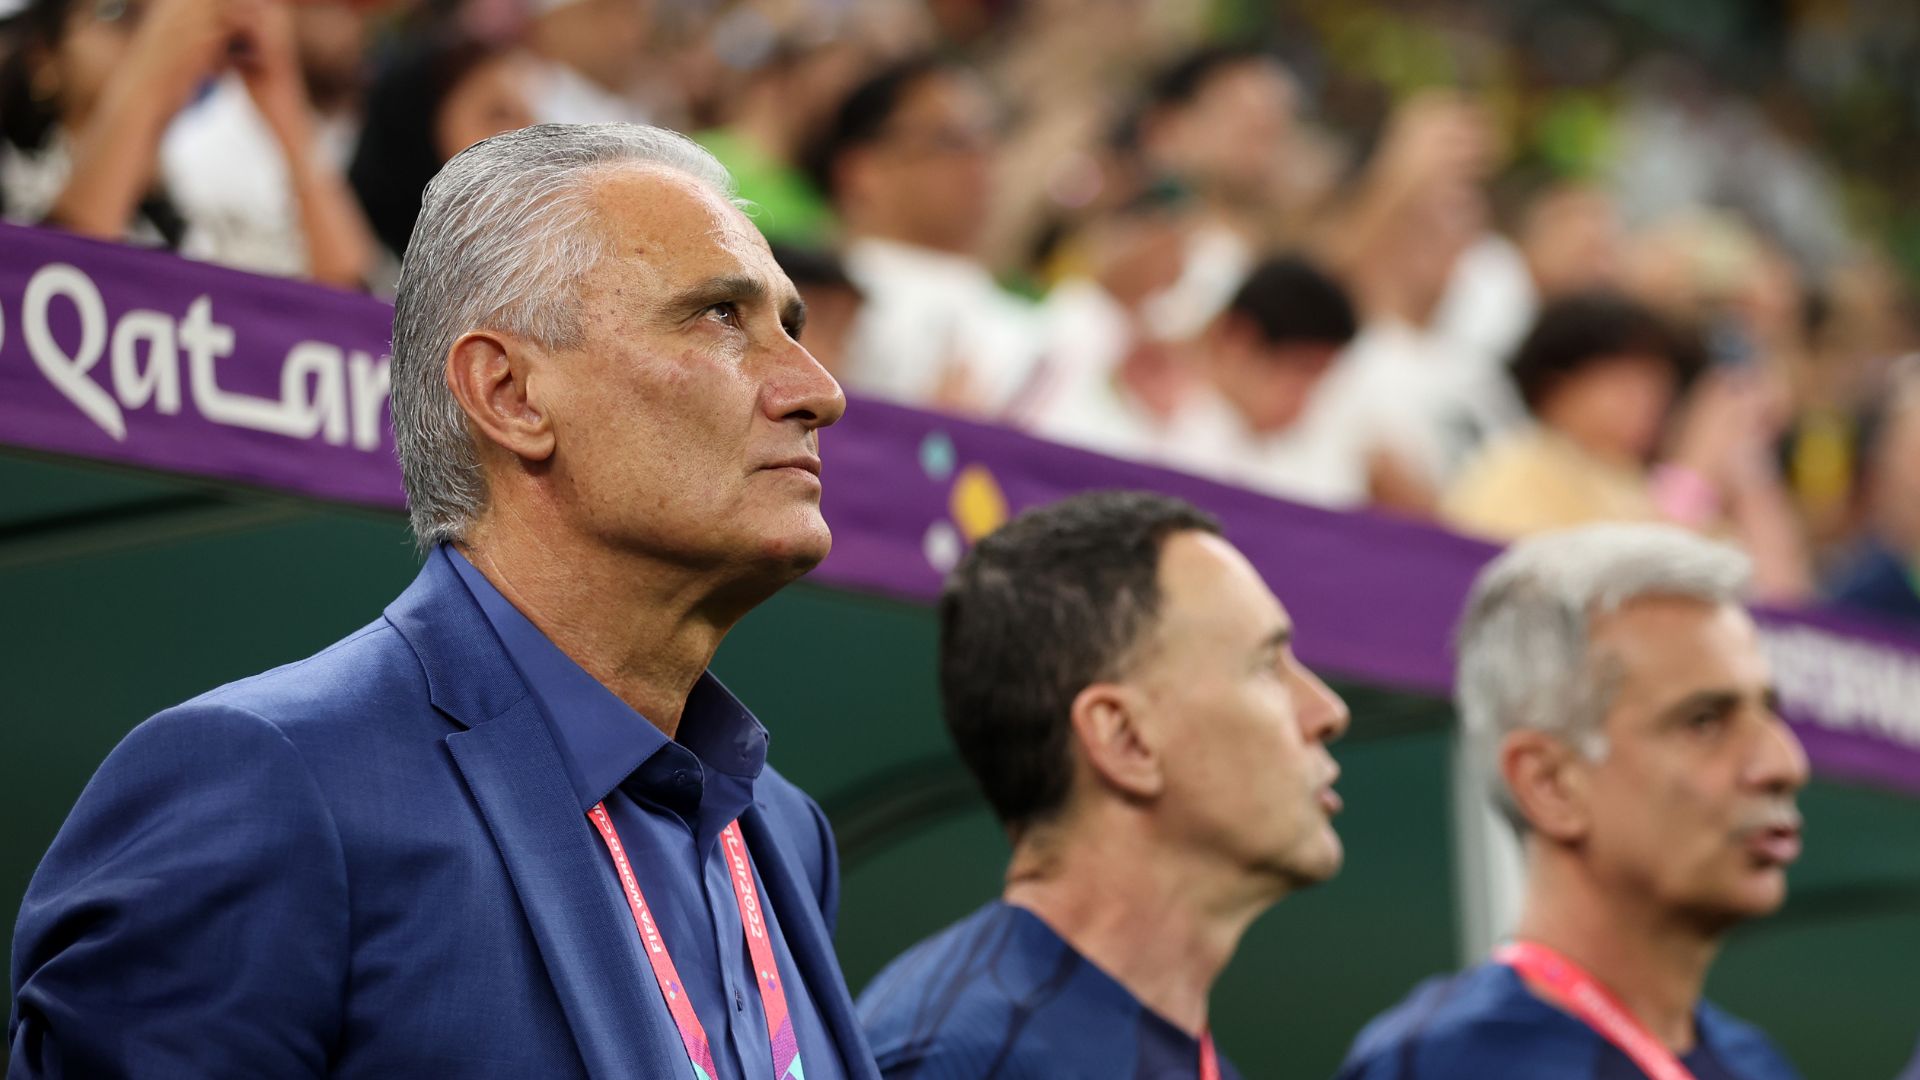 Tite is probed by Corinthians